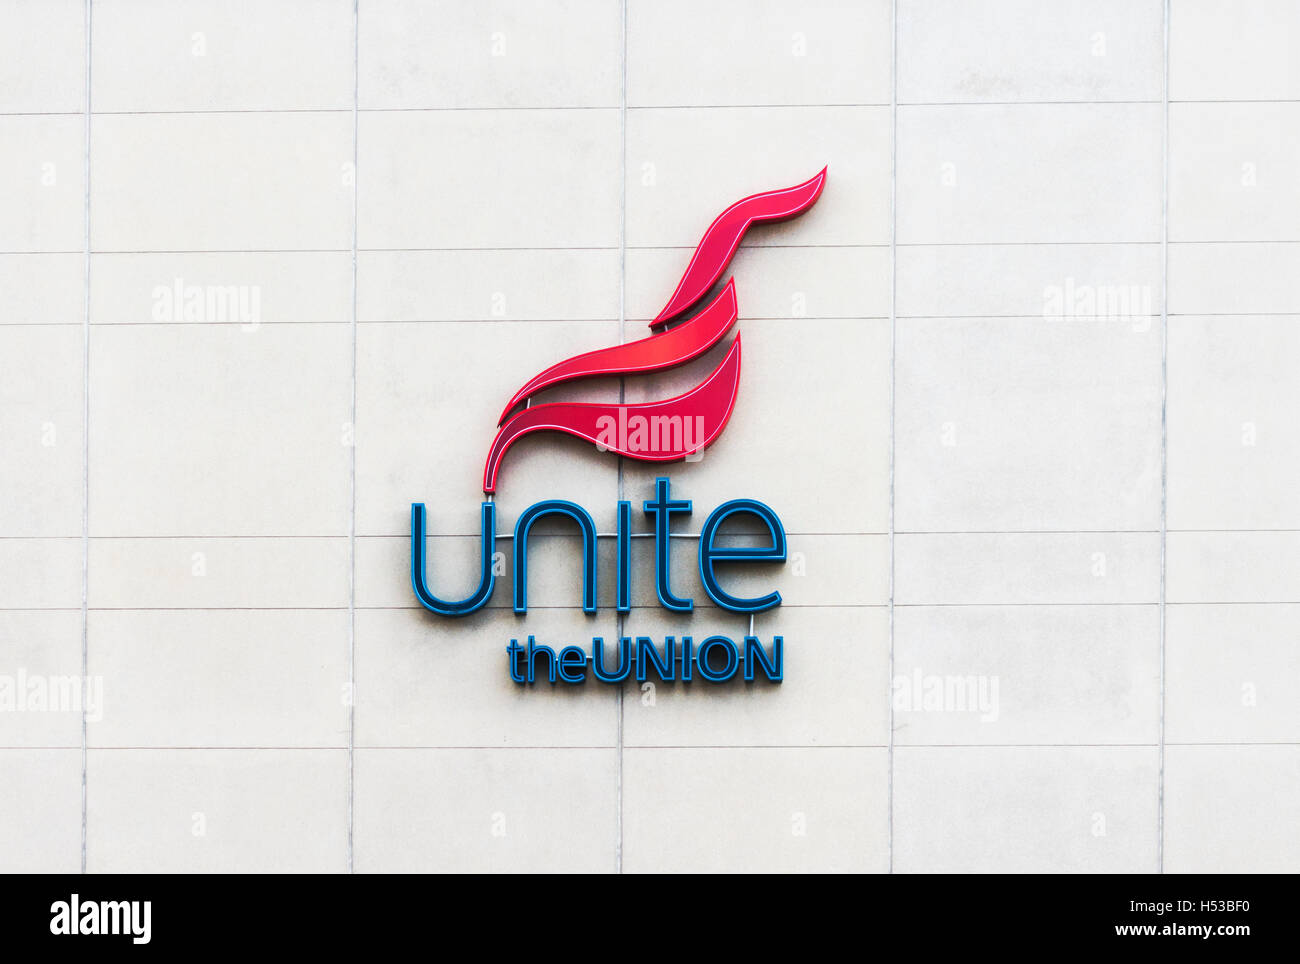 Unite union sign and logo on offices in Newcastle upon Tyne, UK Stock Photo